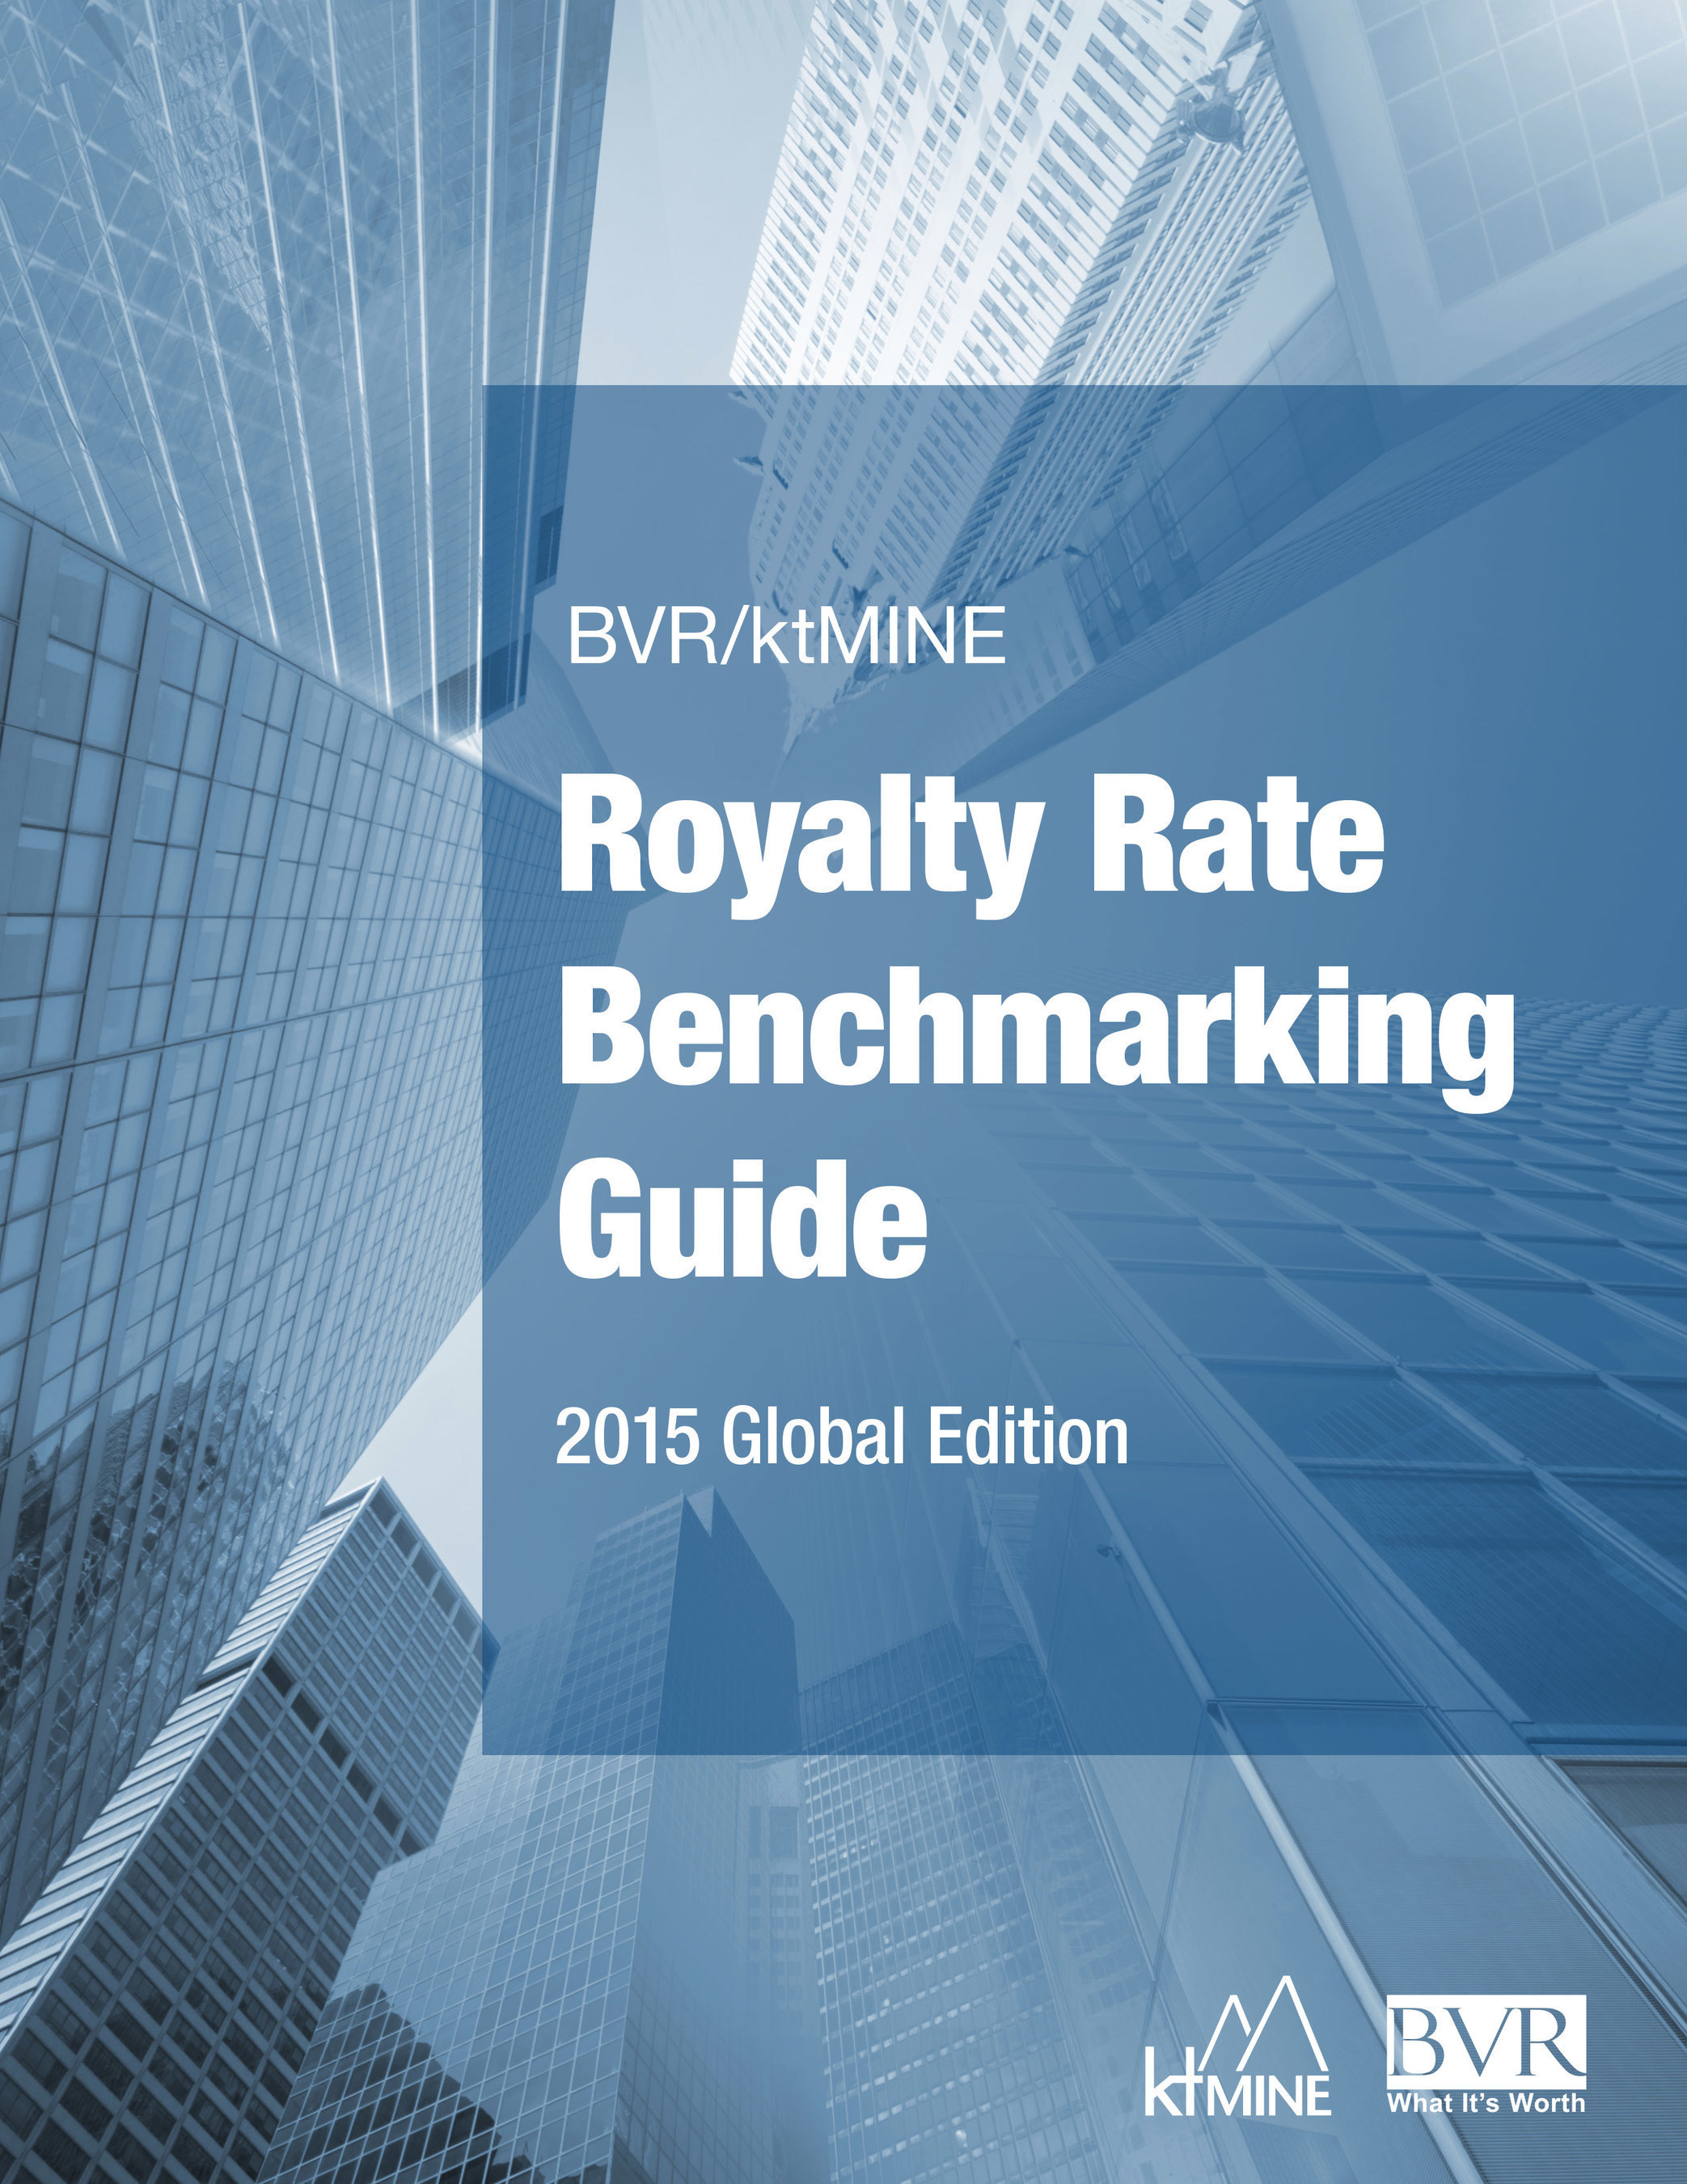 New BVR/ktMINE Royalty Rate Benchmarking Guide, 2015 Global Edition provides industry-level insights into licensing and royalty rate trends.